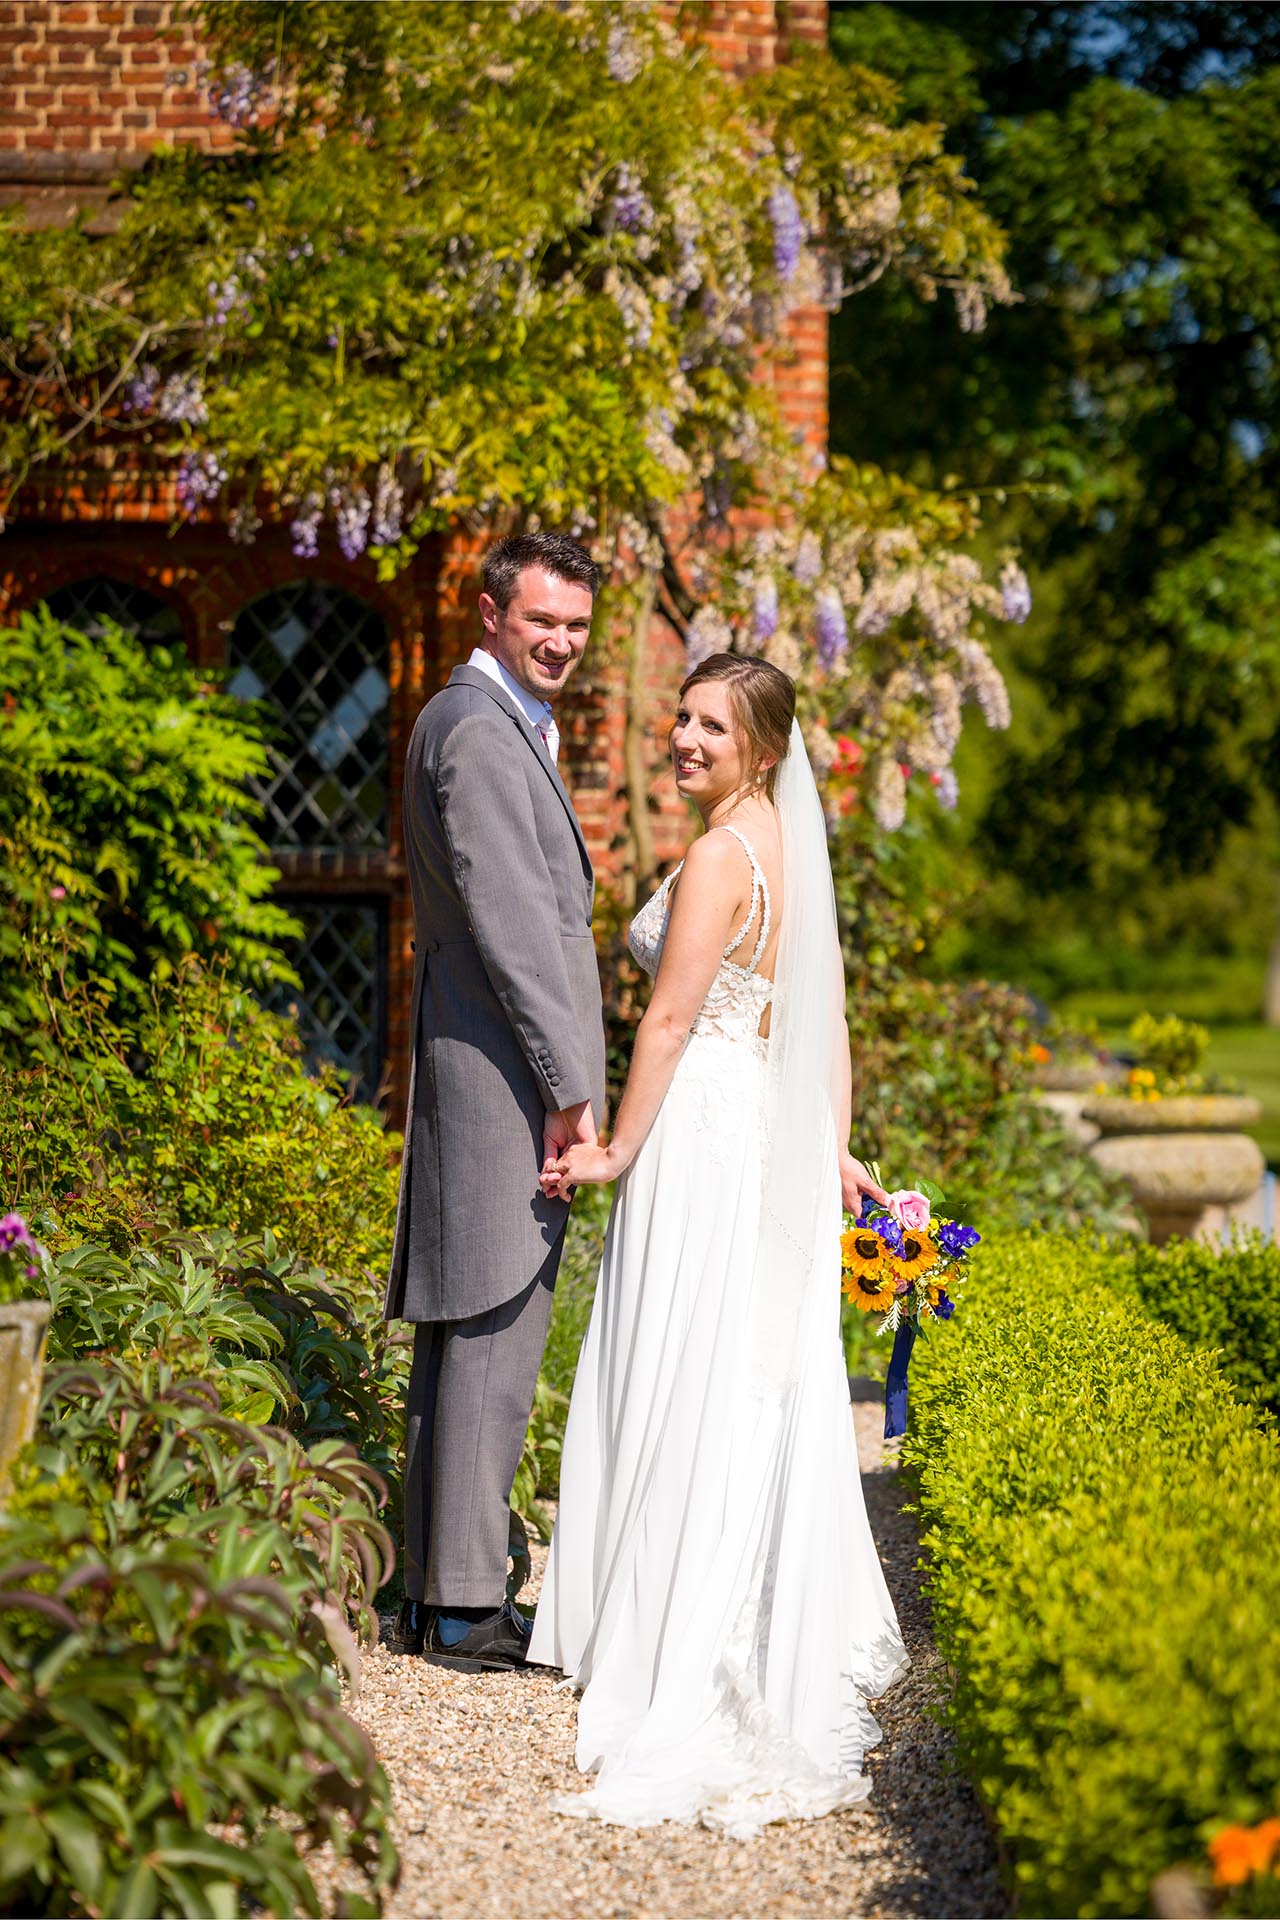 Bride and groom portrait during a summer wedding at Leez Priory, Great Leighs, Chelmsford